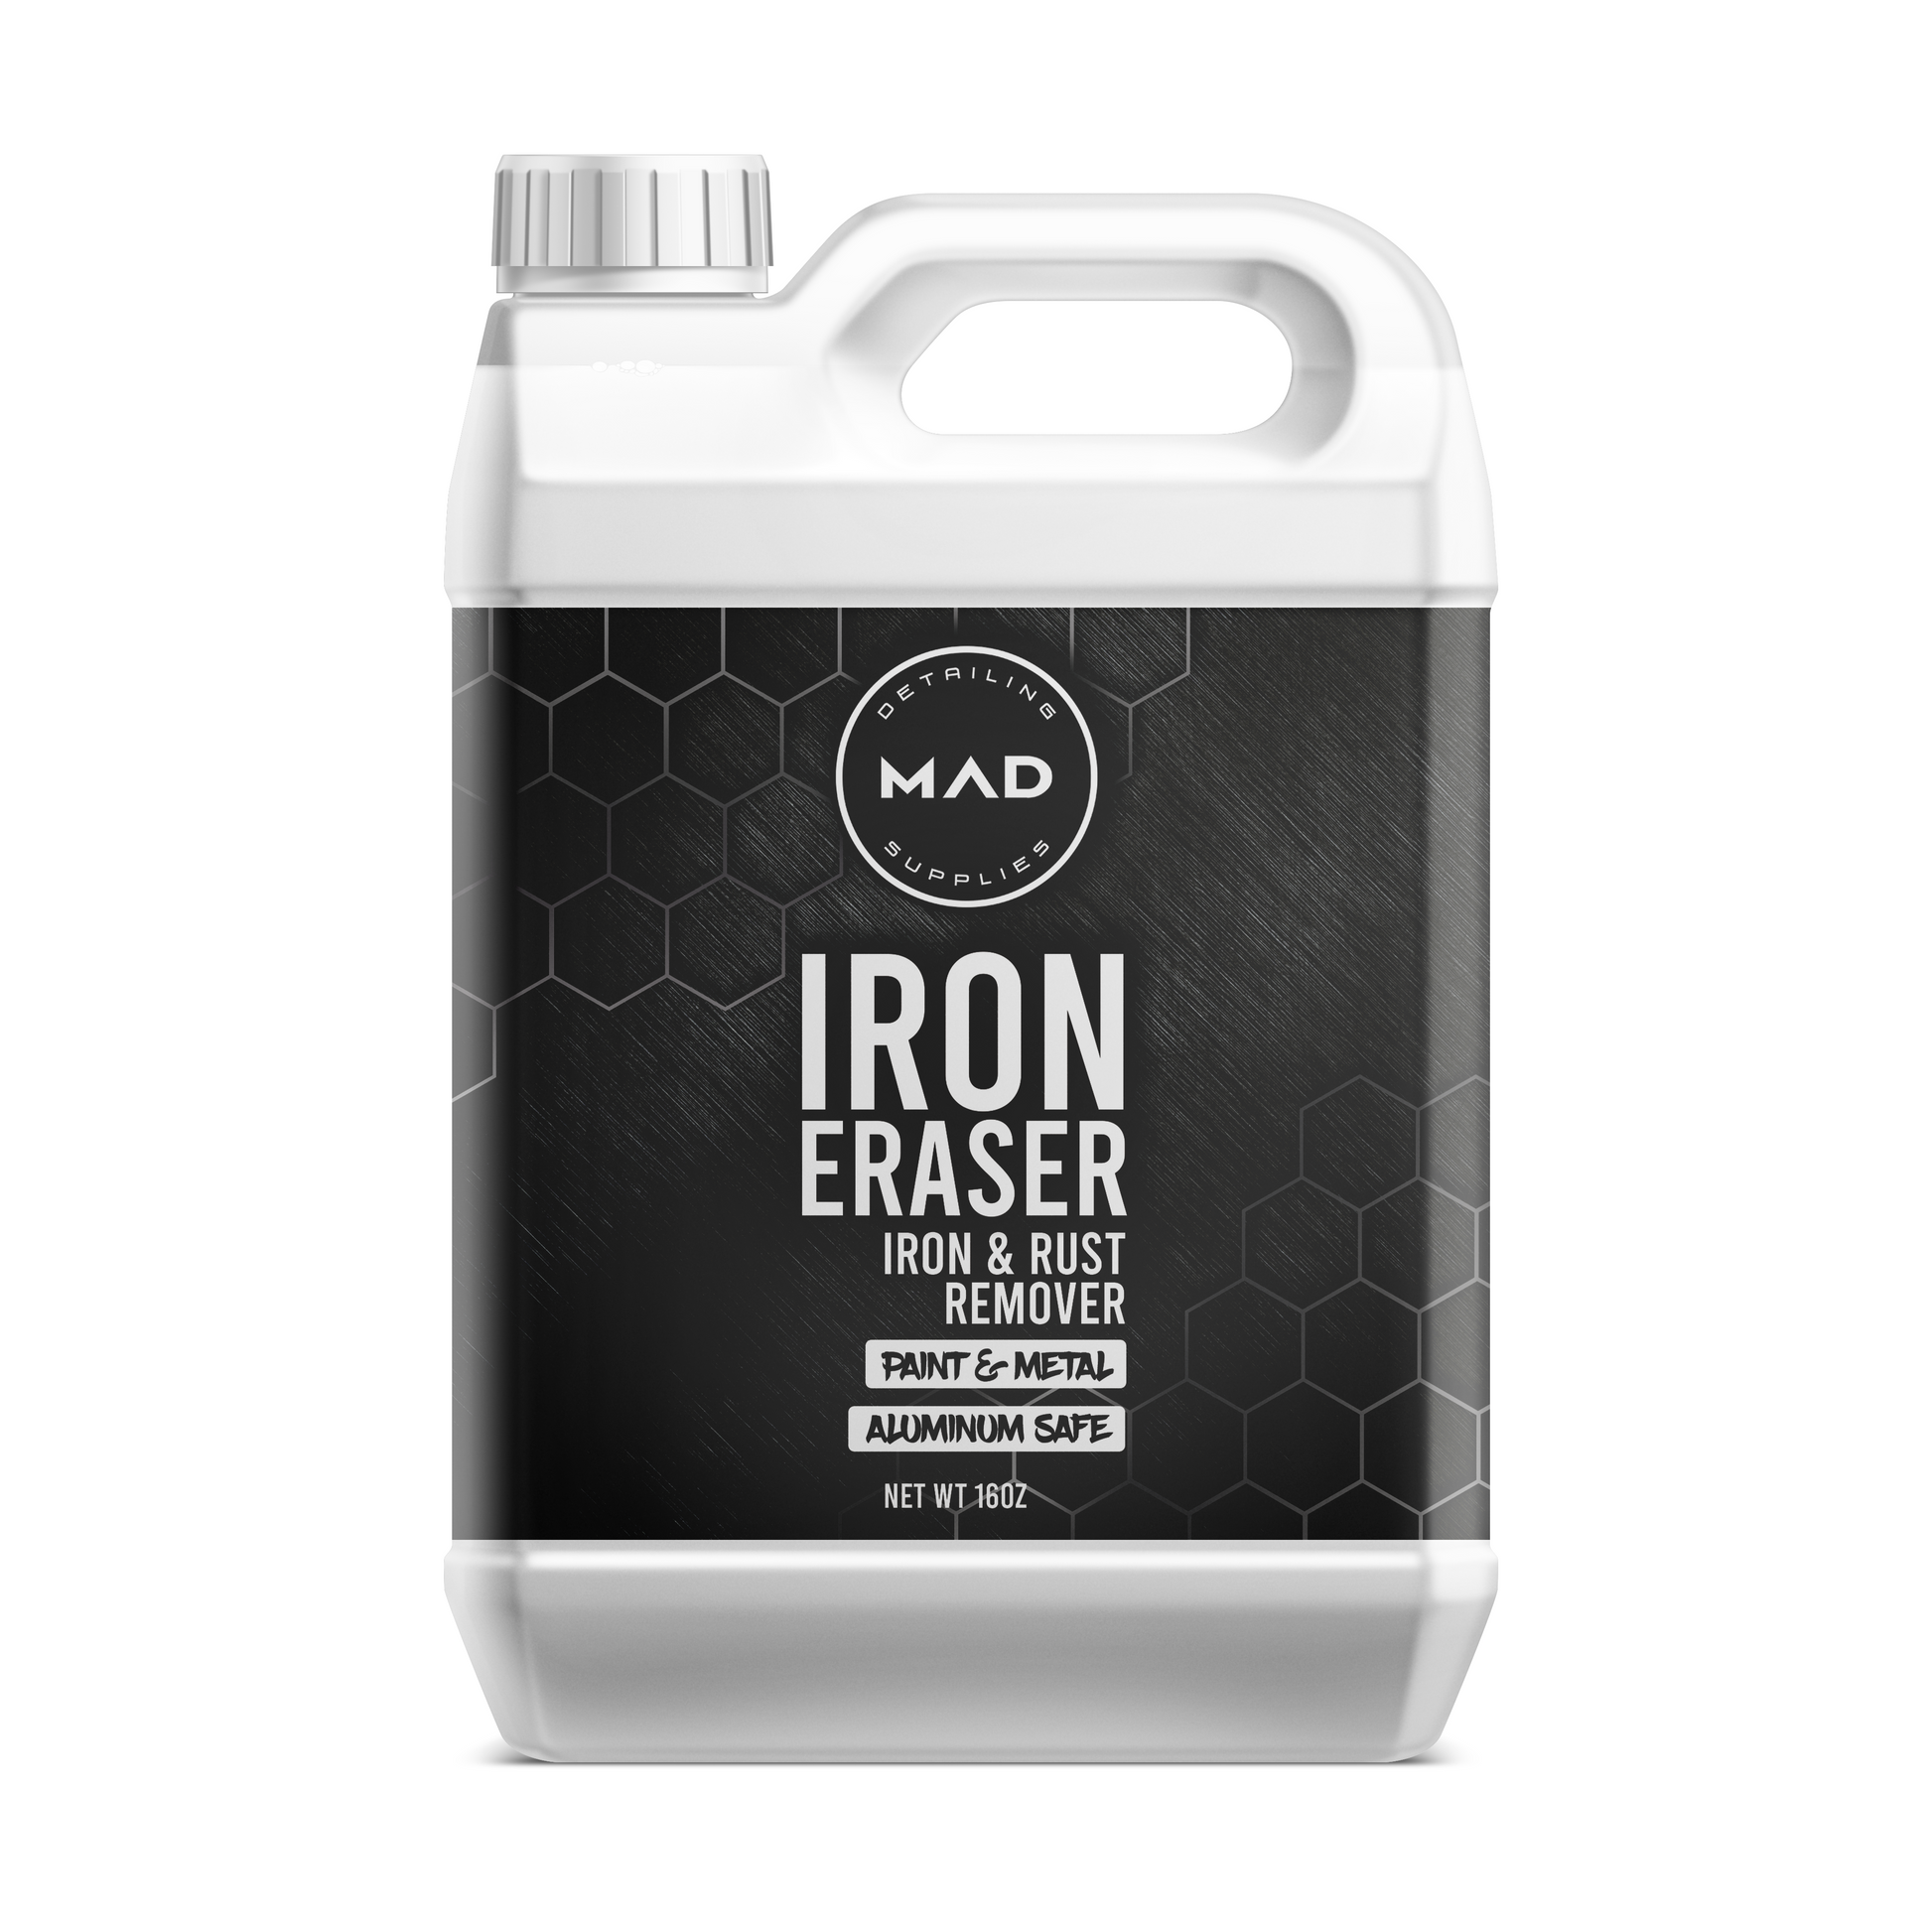 Ez-Off Iron and Ironing Press Cleaner Paste - The Ironing Press Company